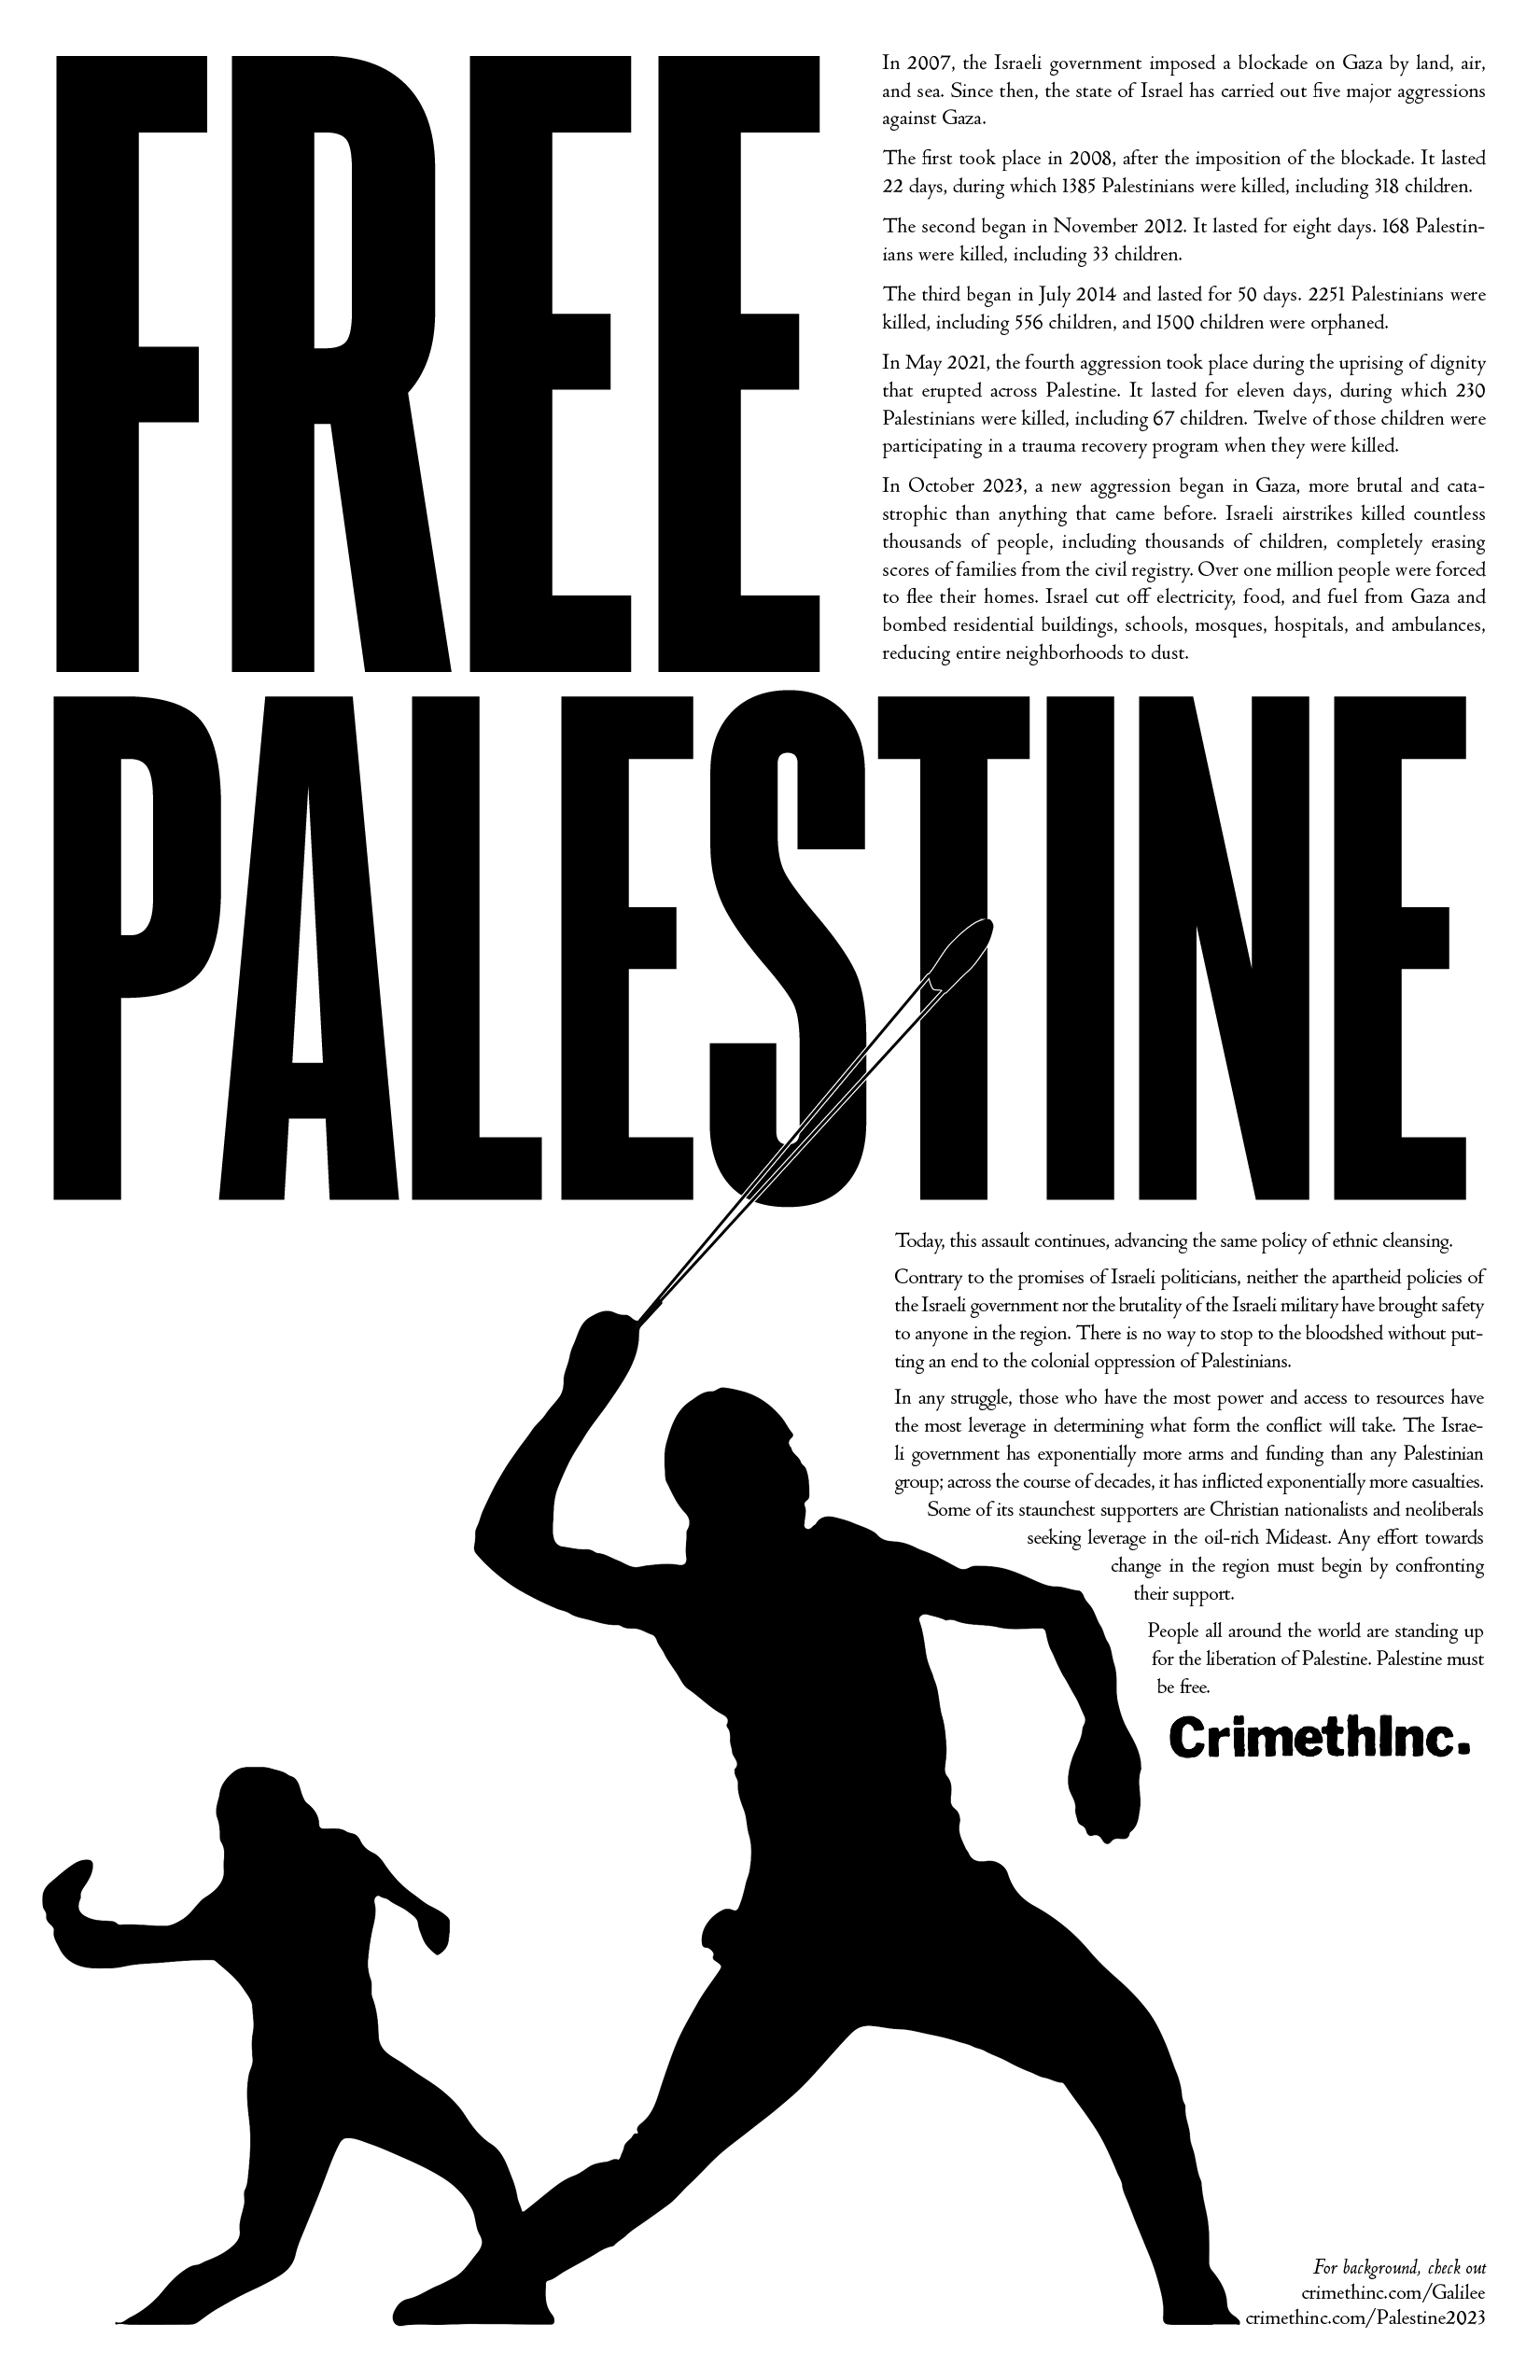 Photo of ‘Free Palestine’ front side